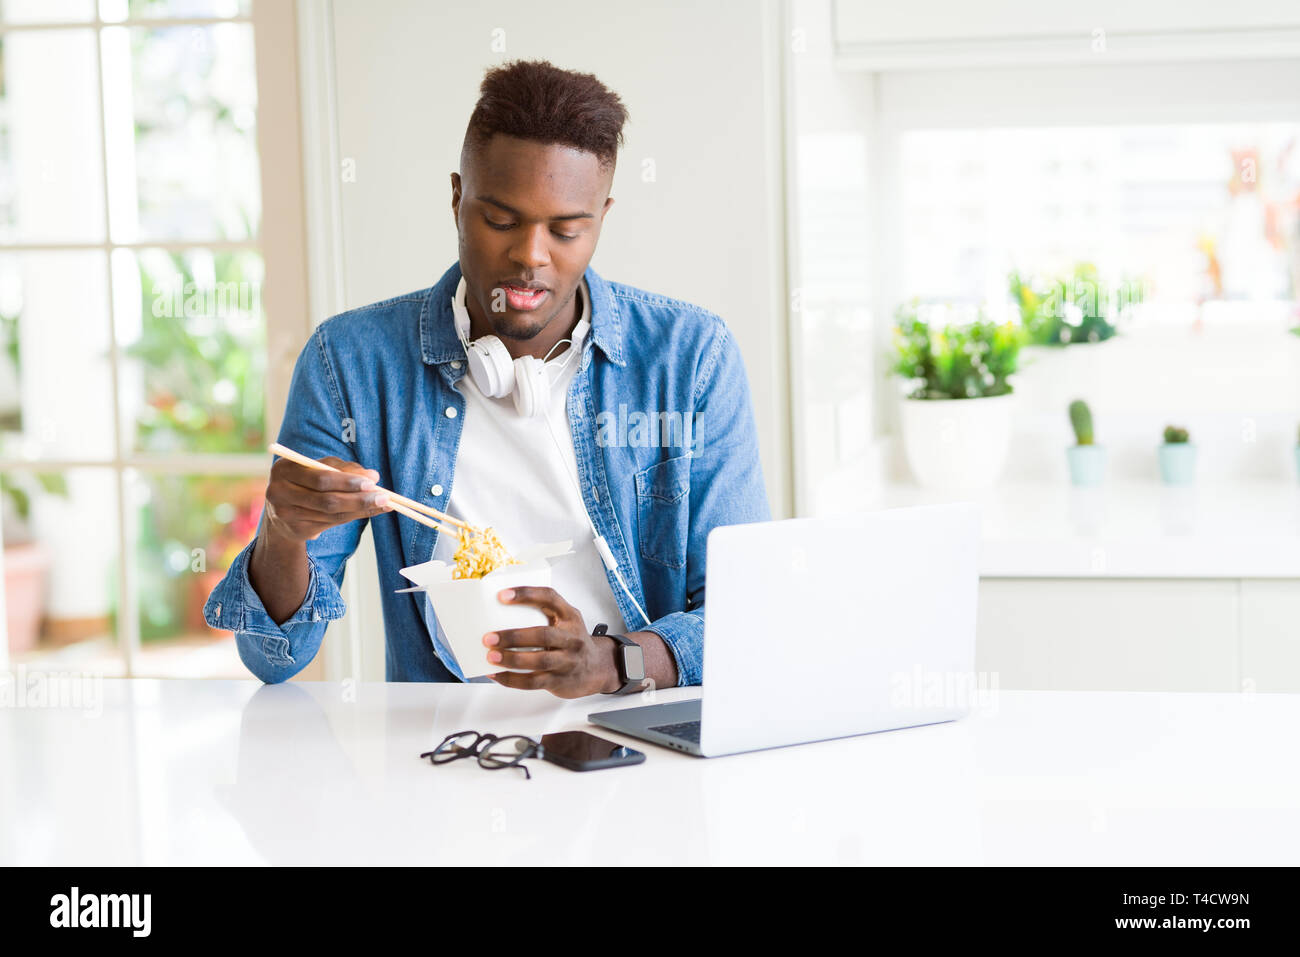 Handsome young african business man eating delivery asian food and working using computer, enjoying noodles smiling Stock Photo